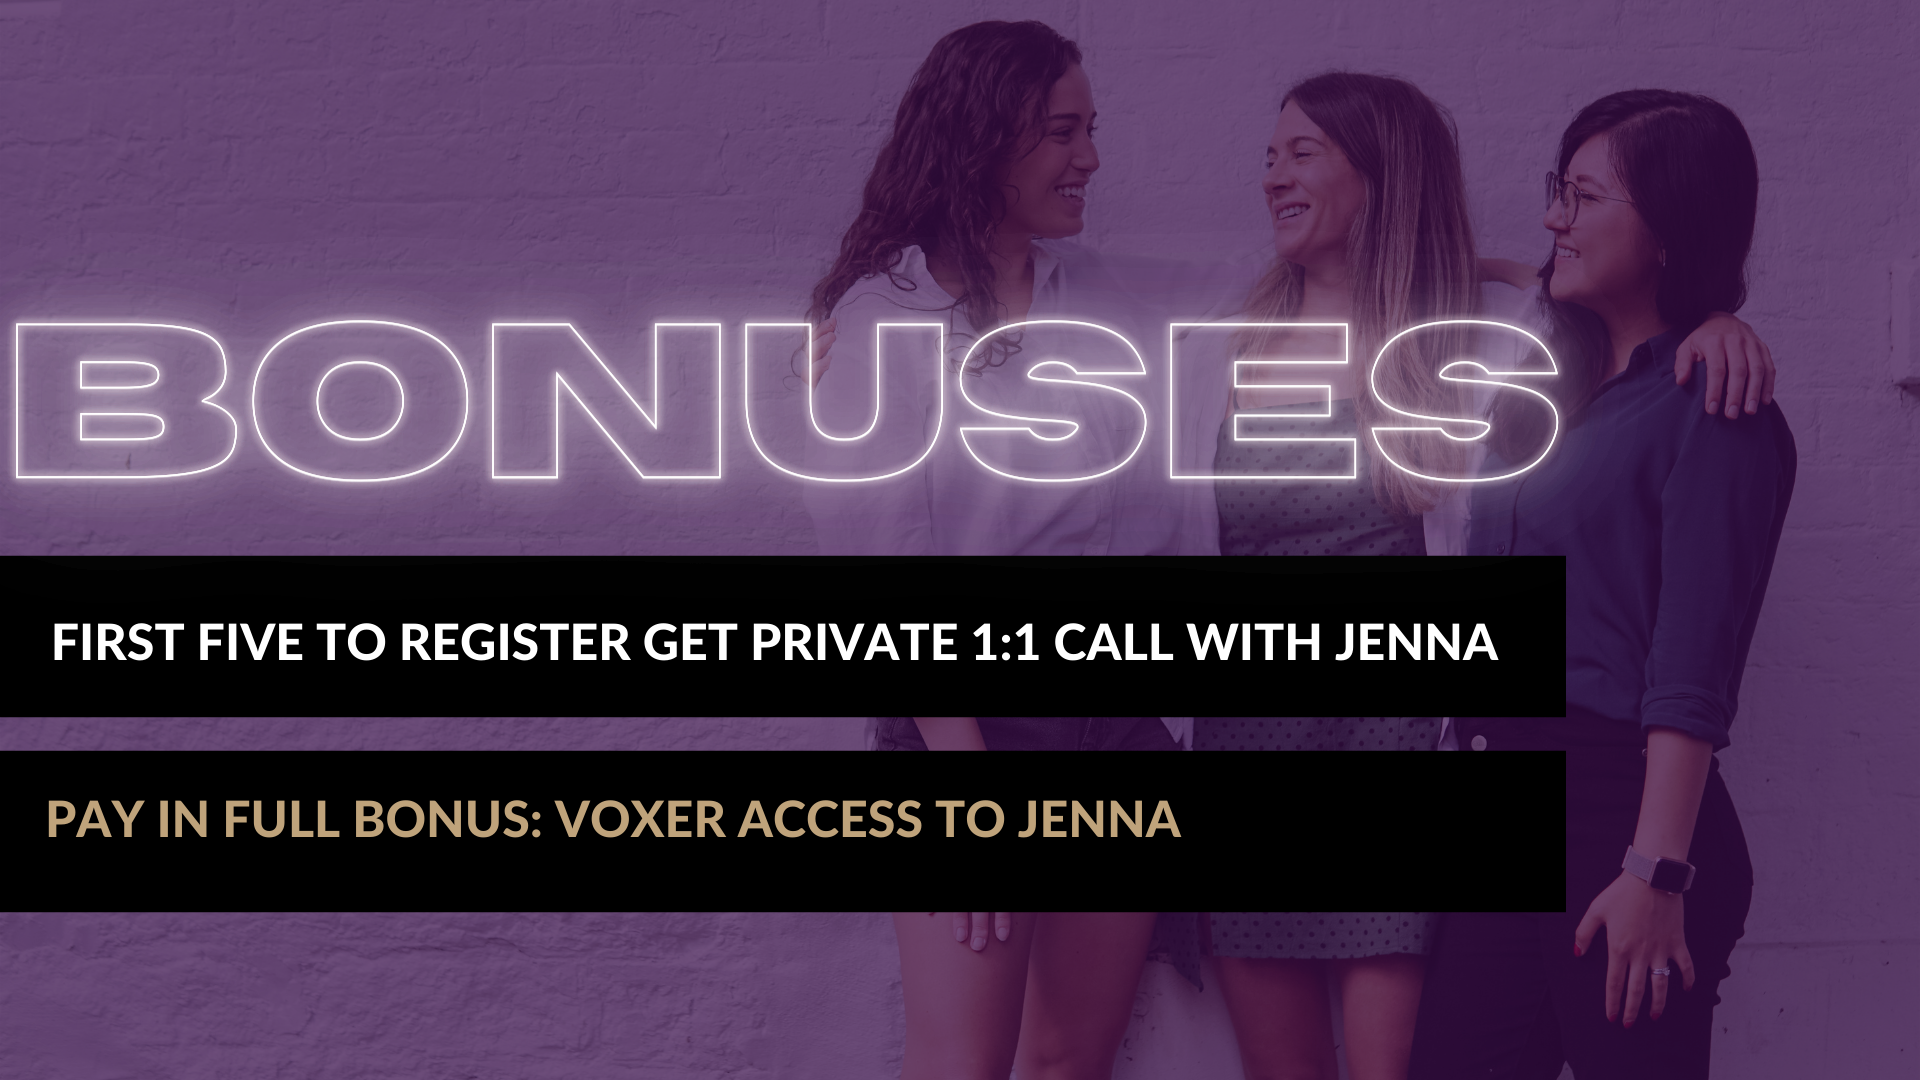 Bonus Access To Jenna for pay-in-full and first 5 women registered